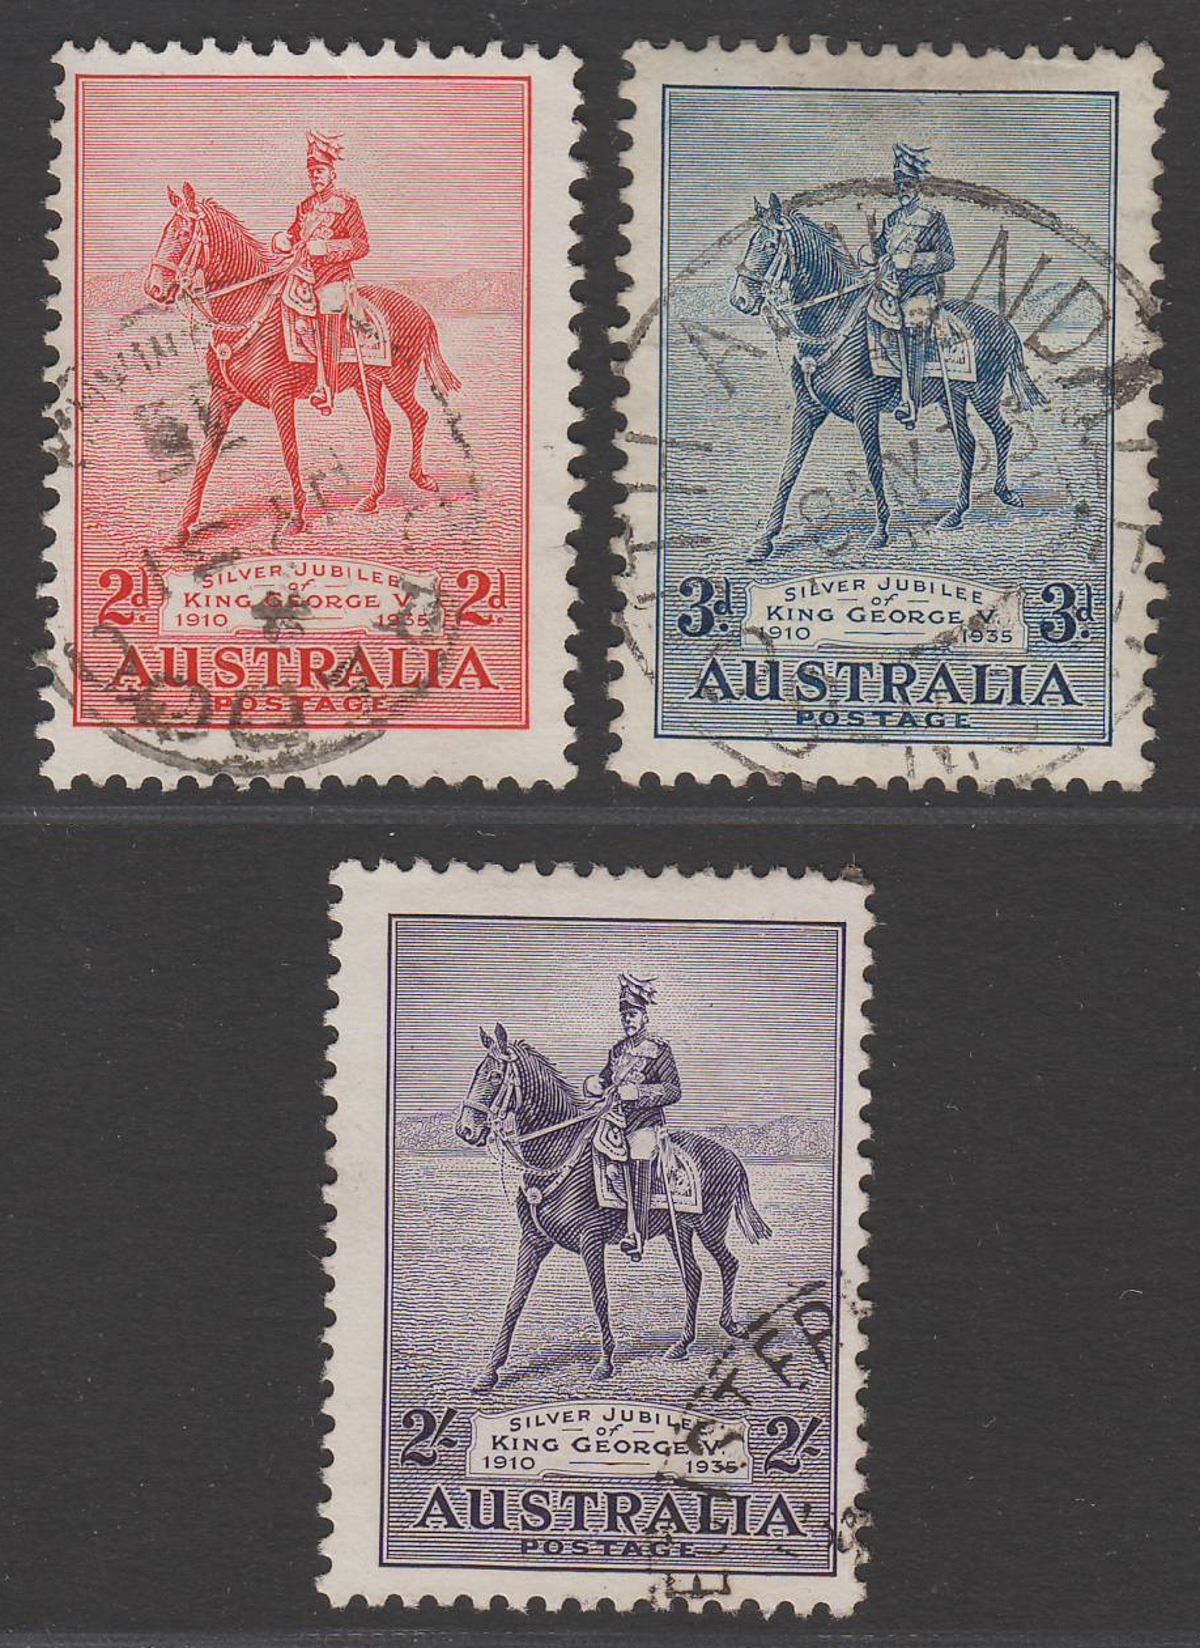 Australia 1935 KGV Silver Jubilee Set Used SG156-158 cat £55 the 3d faulty